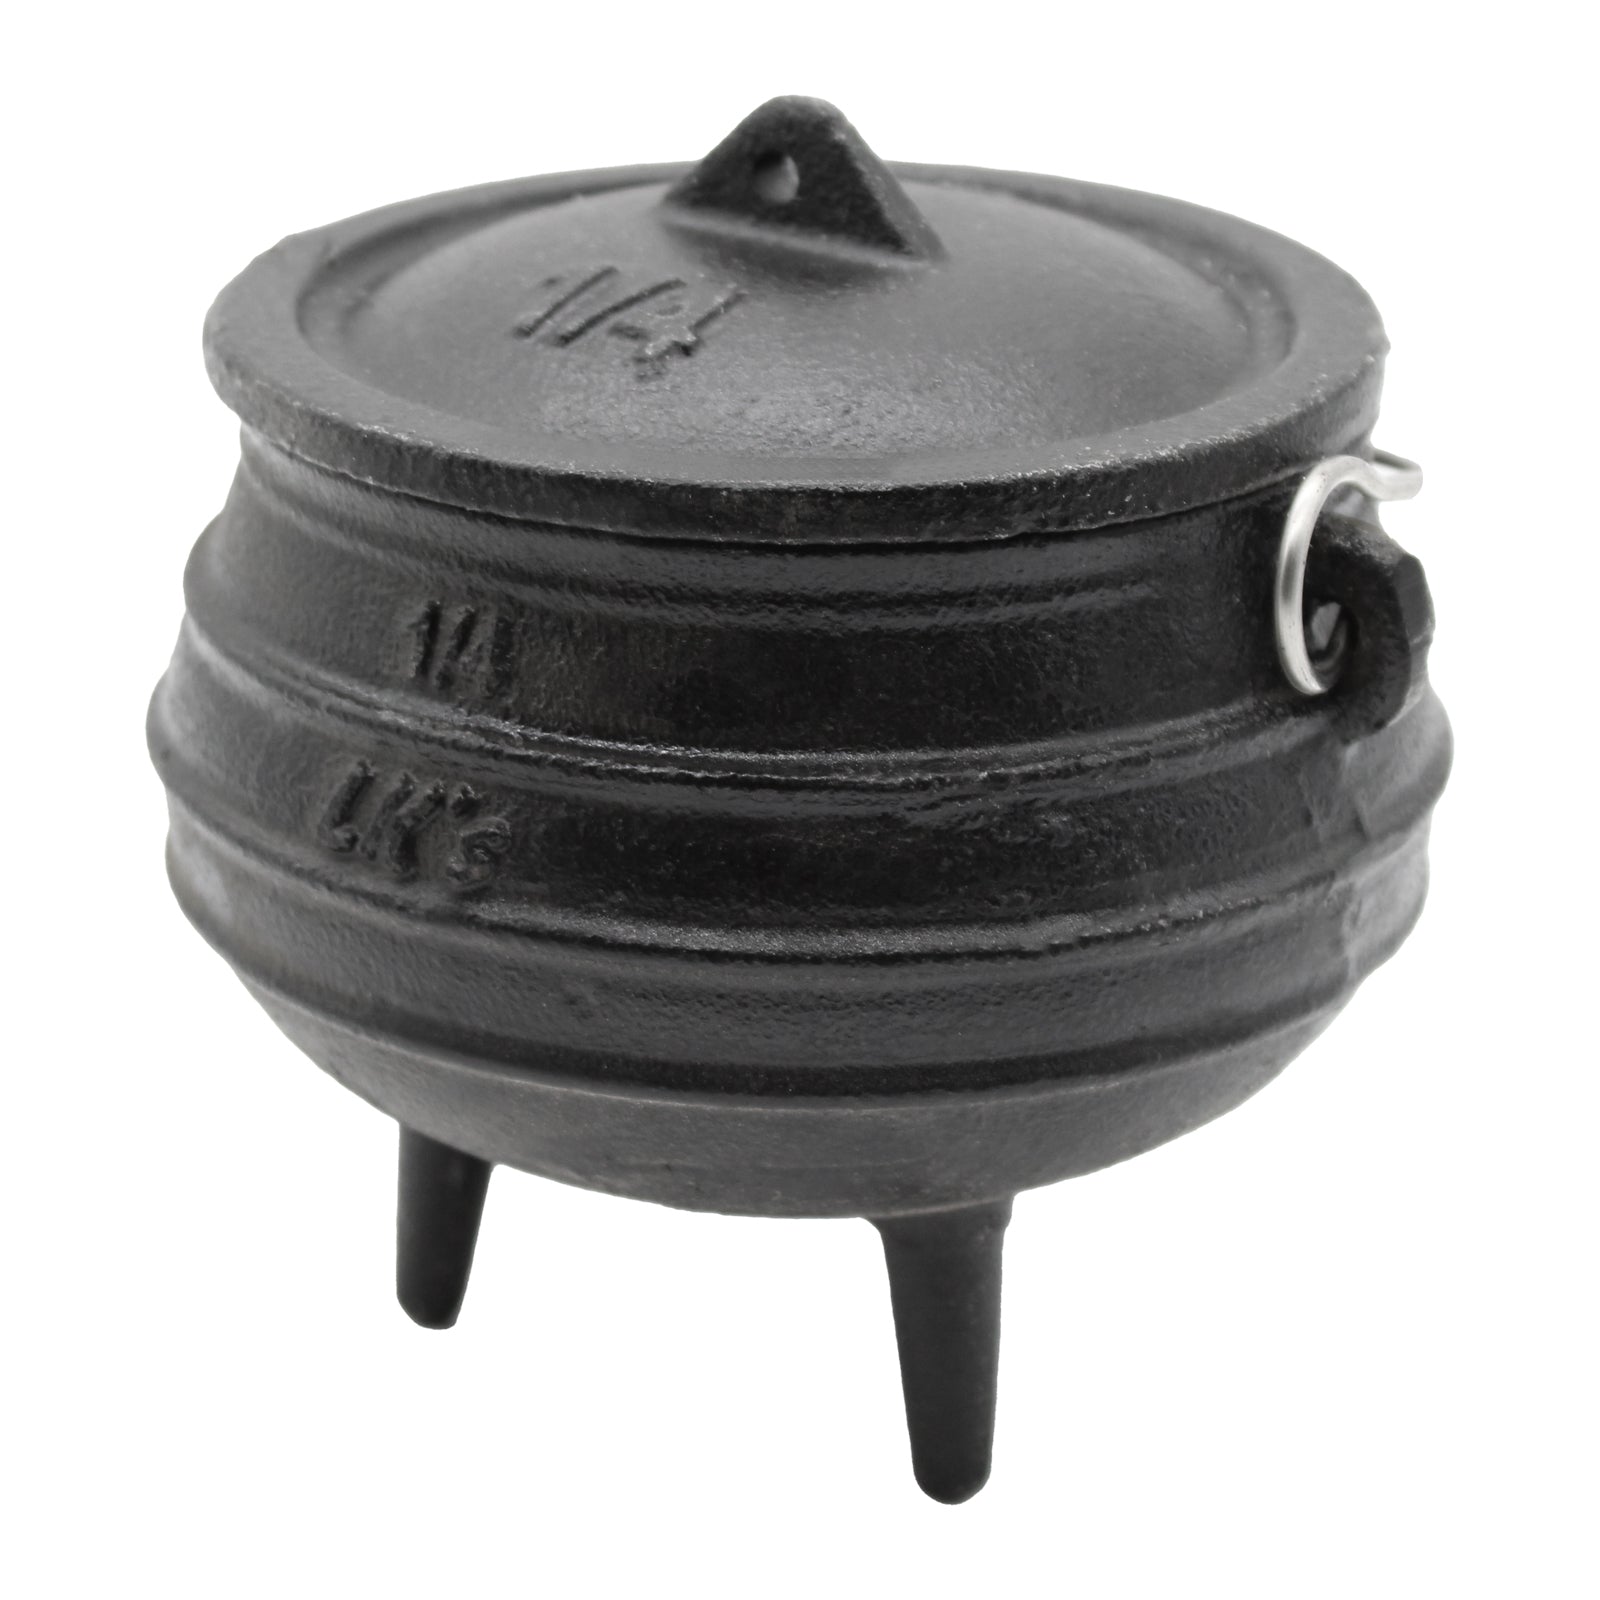 1/4 Potjie Cooking Pot with lid